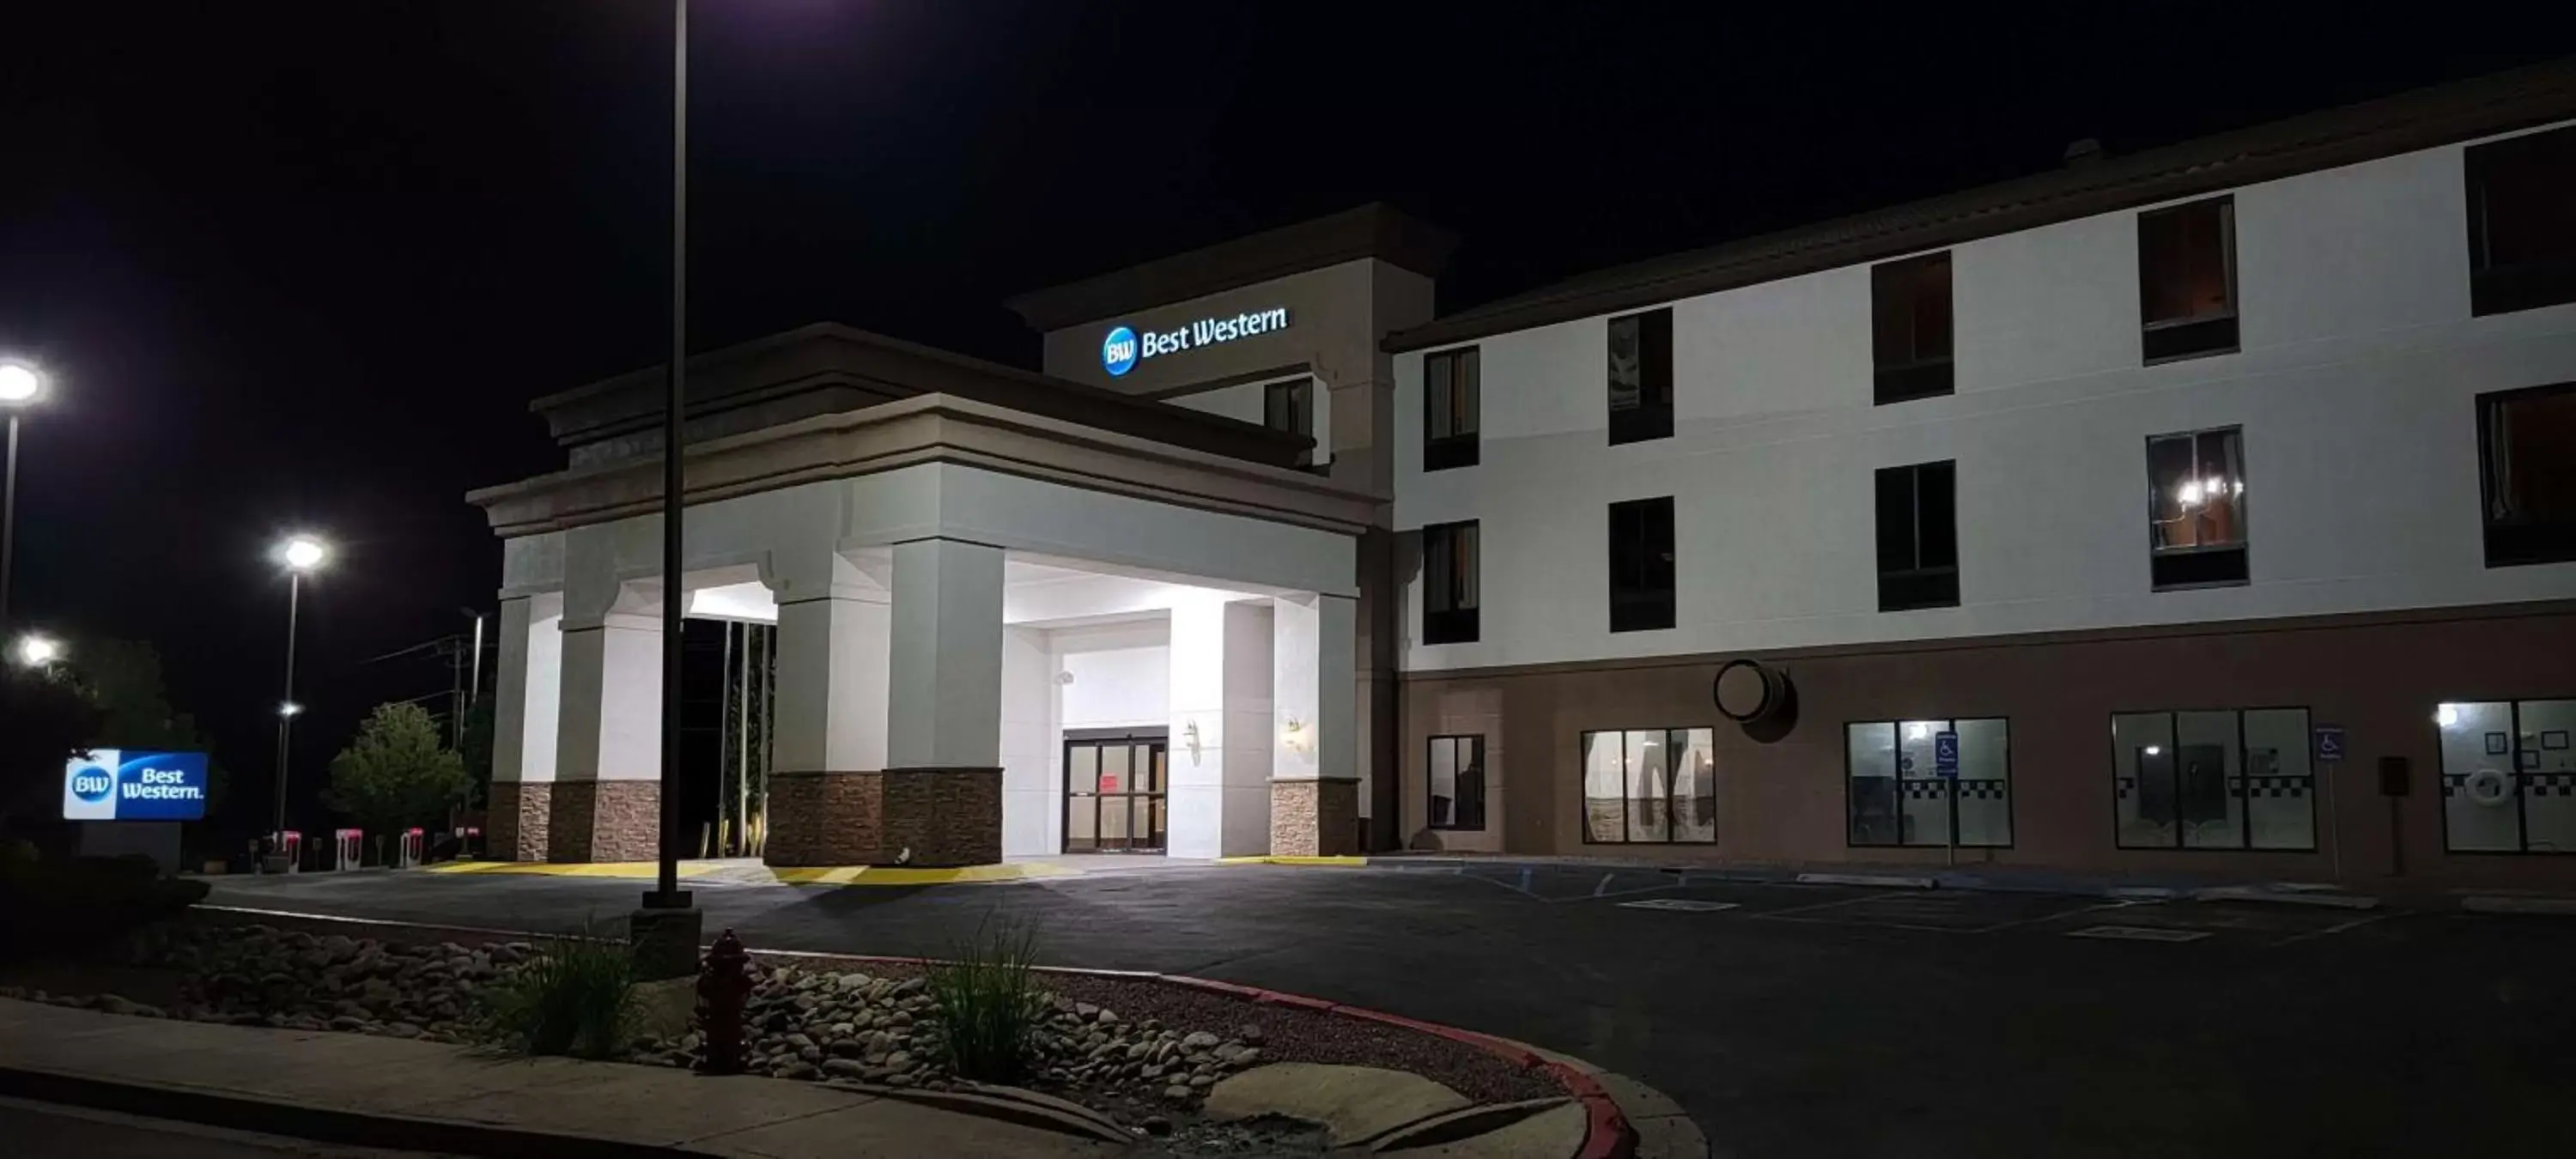 Property Building in Best Western Gallup West